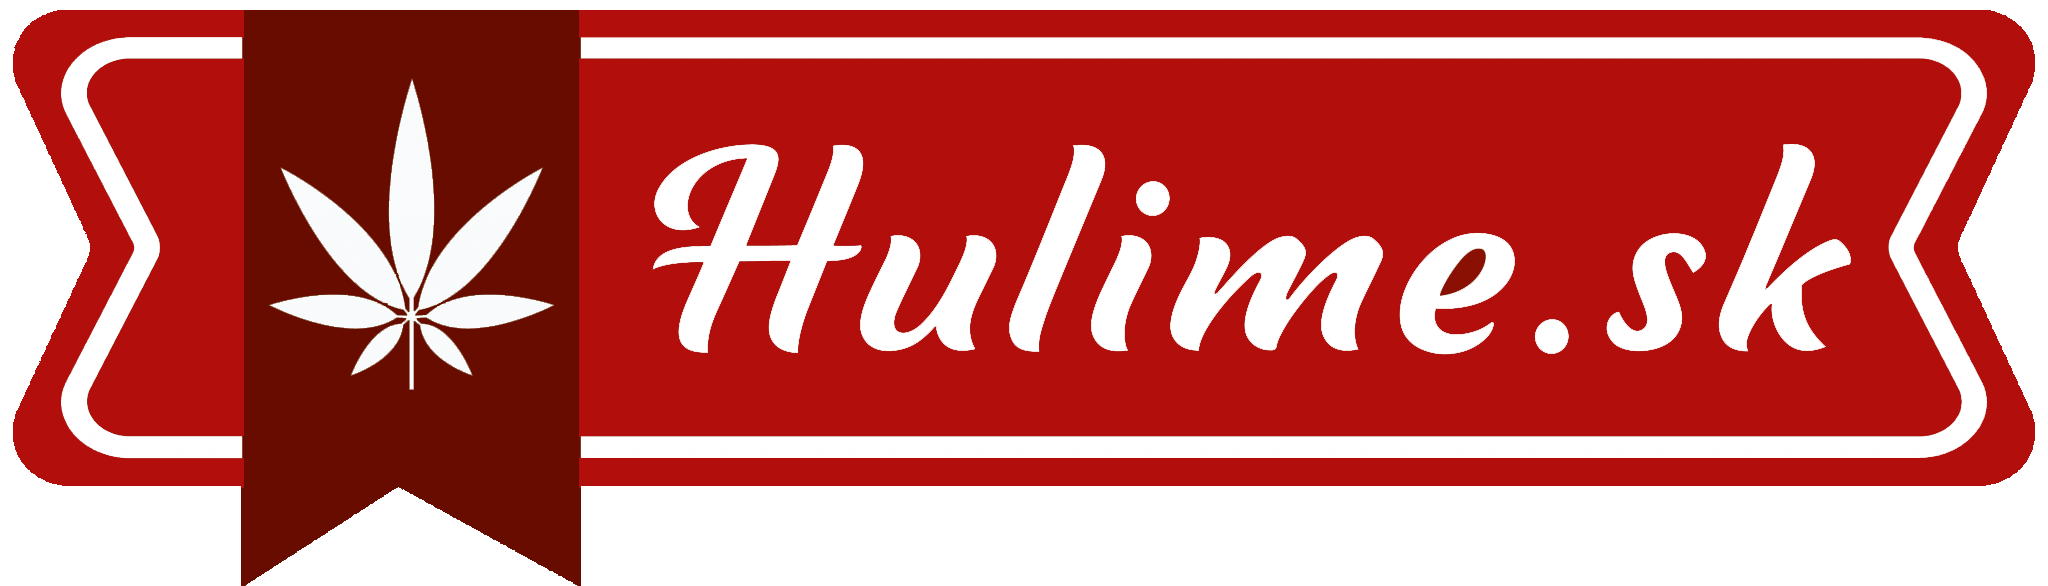 Hulime.sk